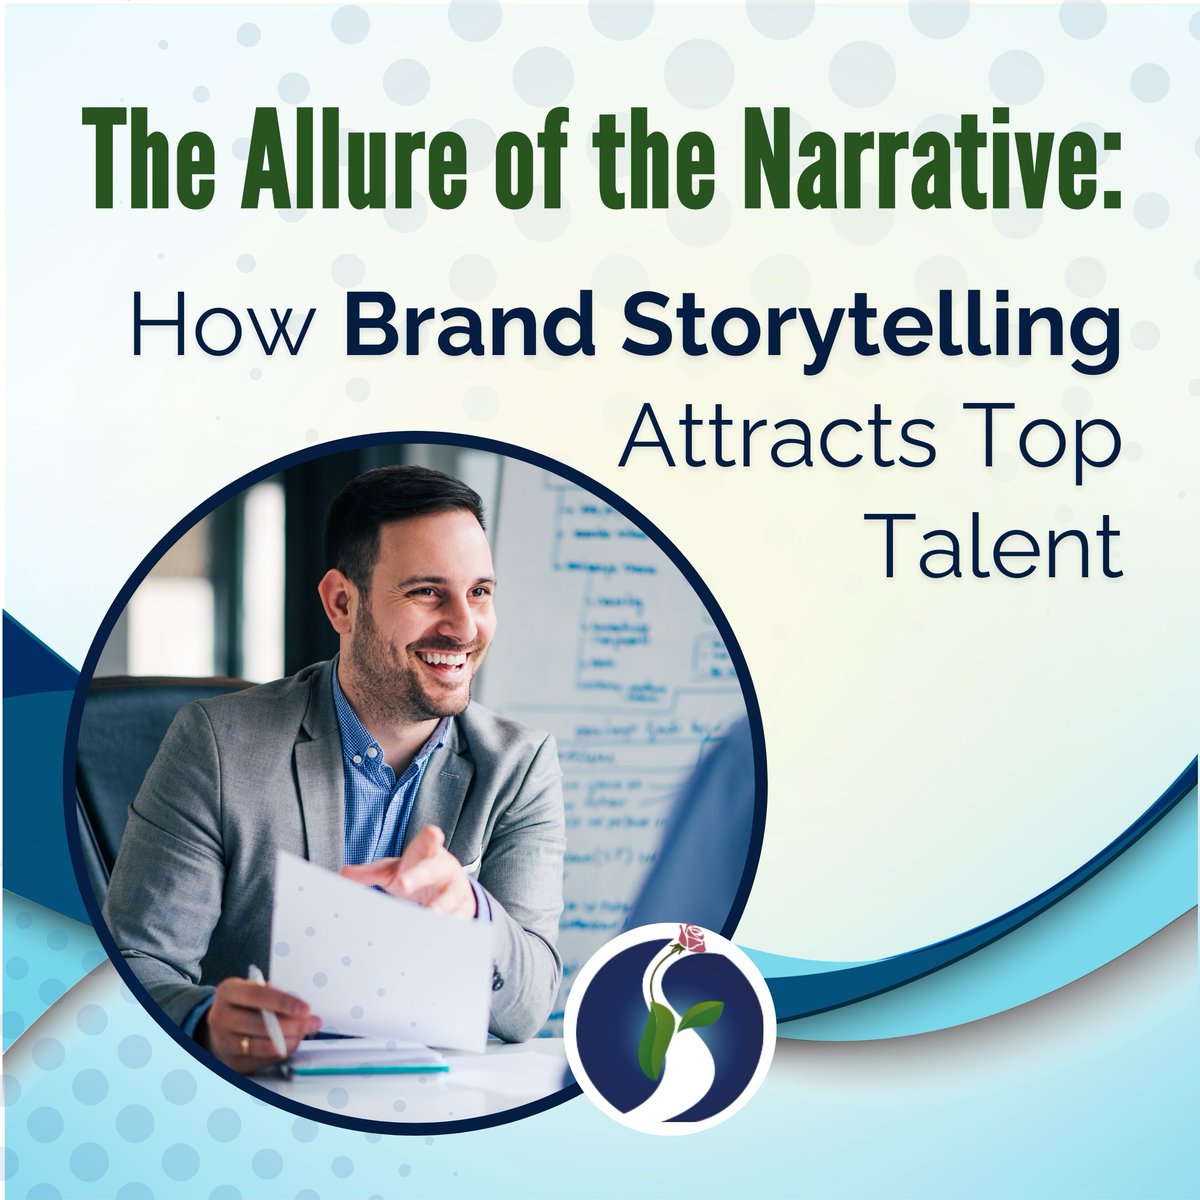 We all know Storytelling is crucial for brand success. But how is storytelling equally crucial for your hiring needs?   

Read to know more: syarose.com/blog_managemen…  #employerbranding 

#syarose #talentattraction #companyculture #authenticmarketing #careerdevelopment